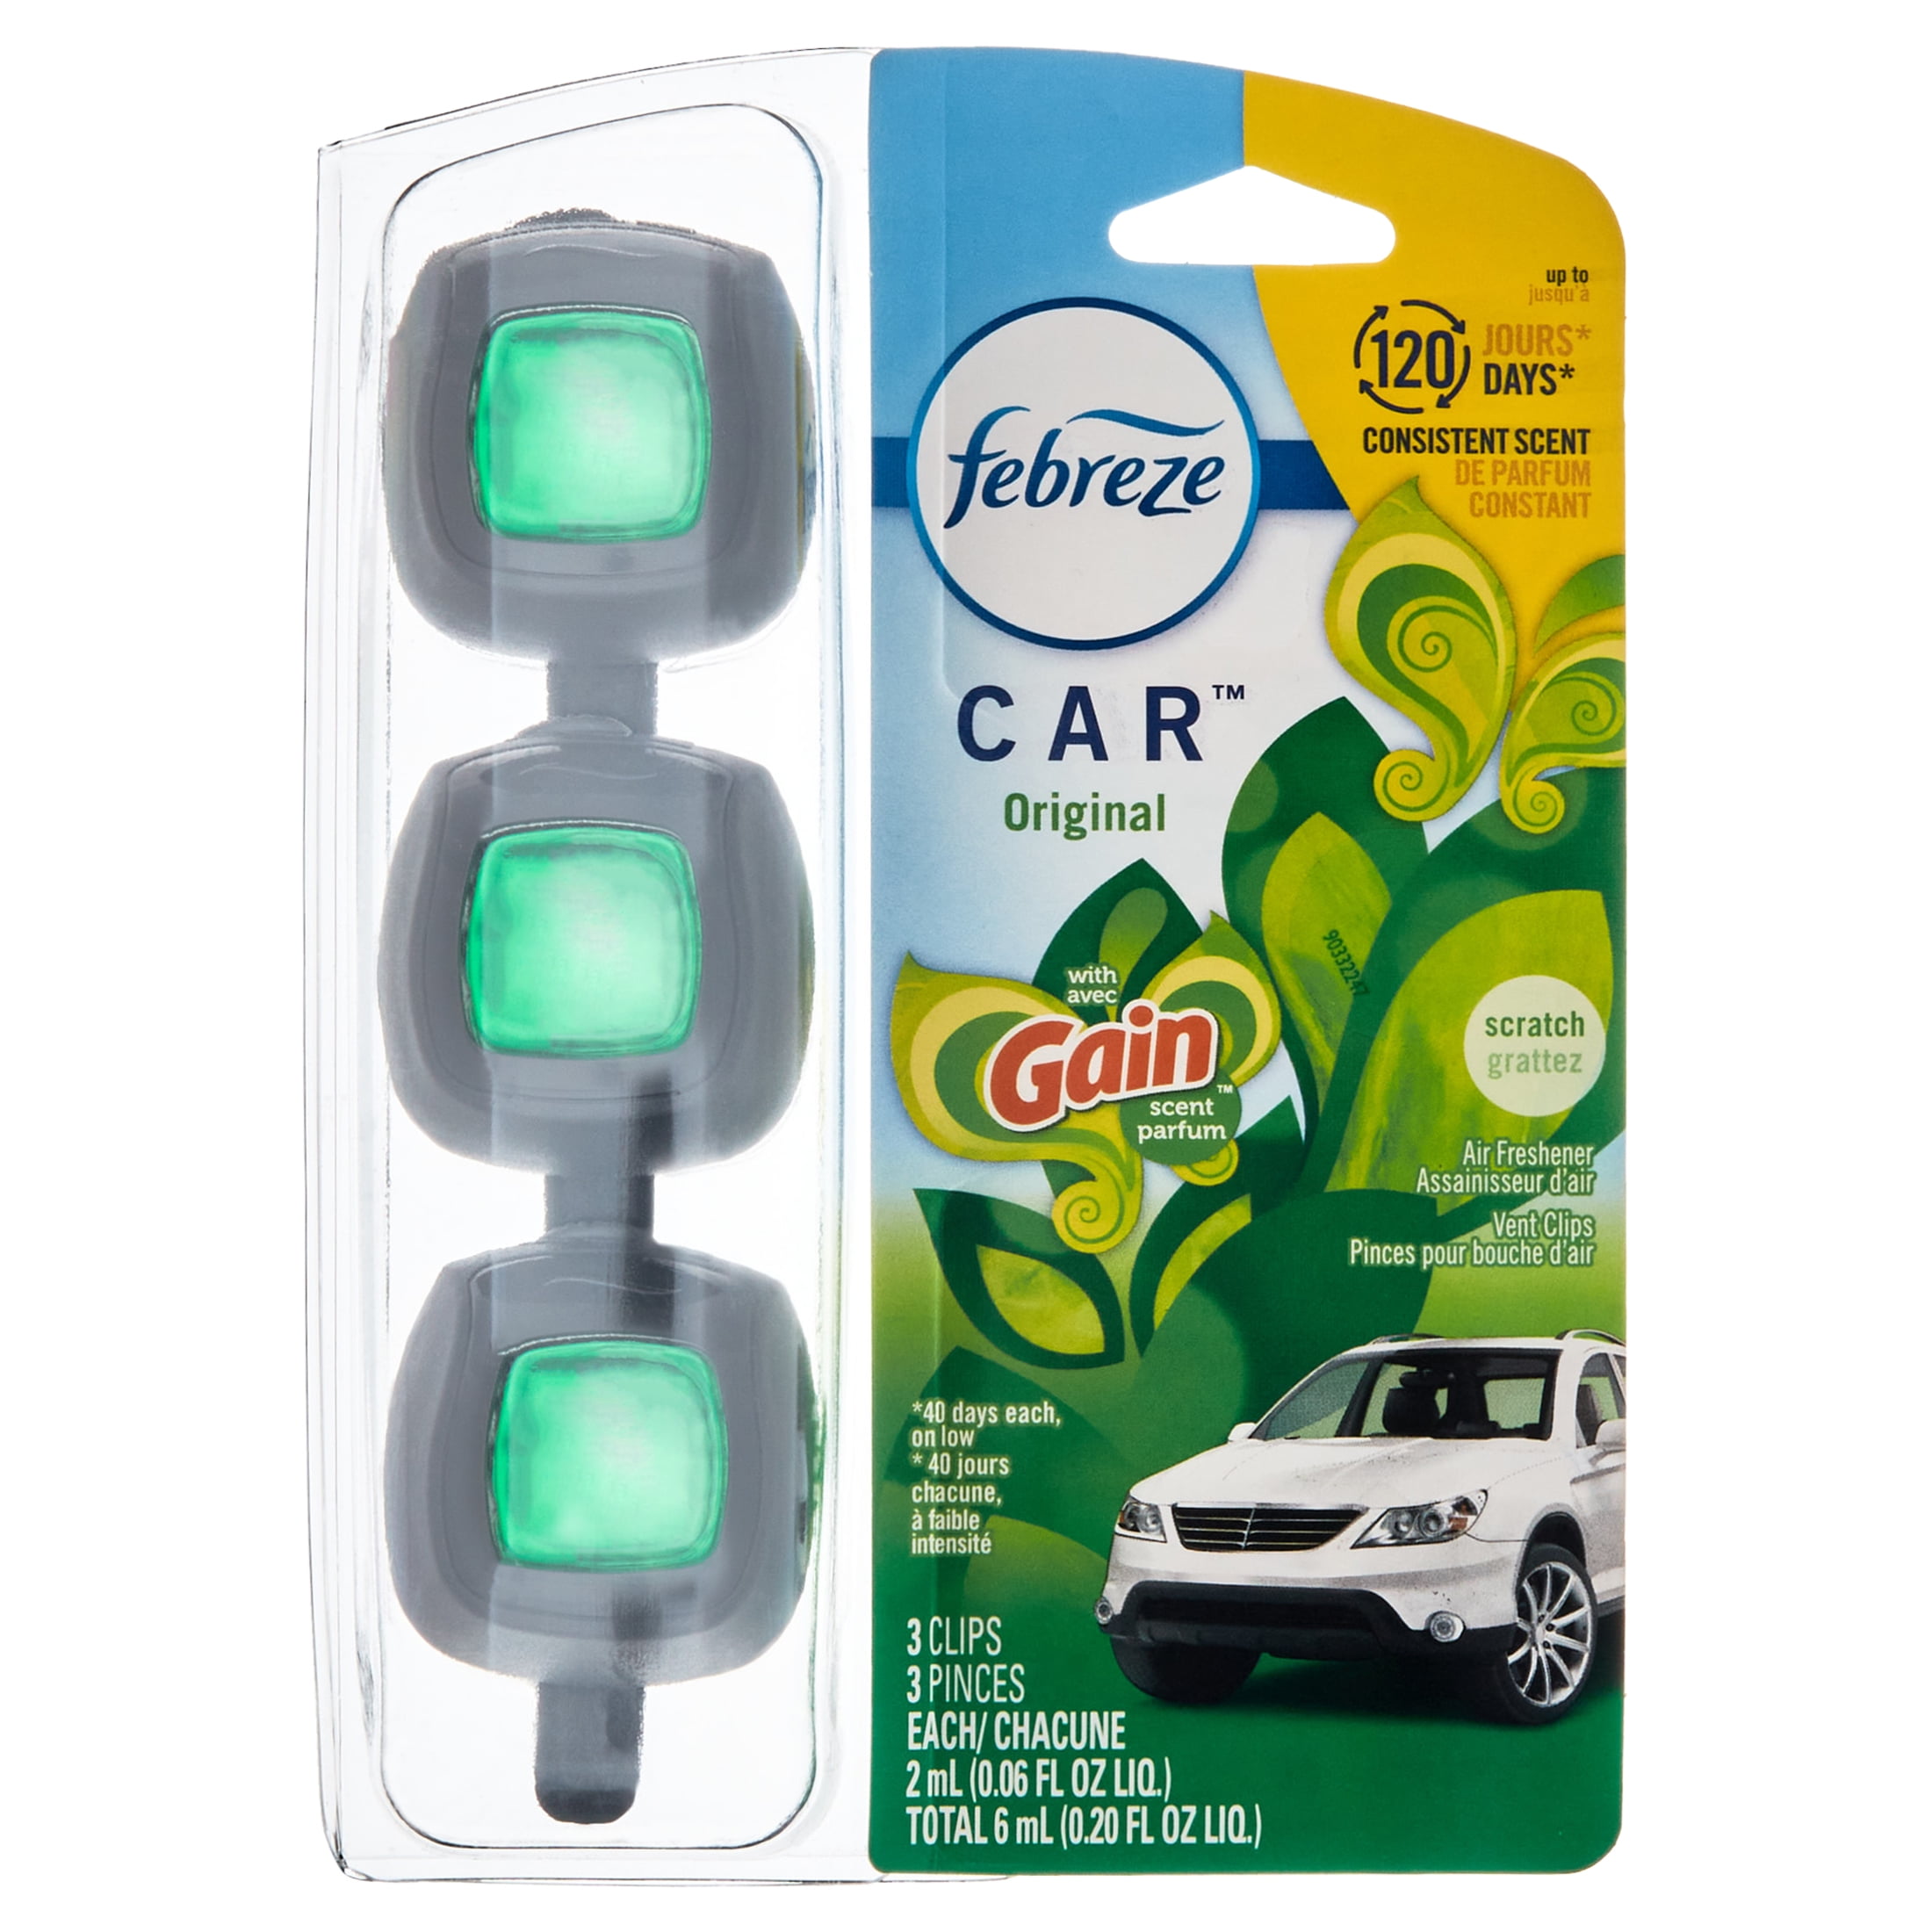 Febreze Car Air Fresheners, Gain Original Scent, Odor Fighter for Strong  Odors Car Vent Clips (2 Count)